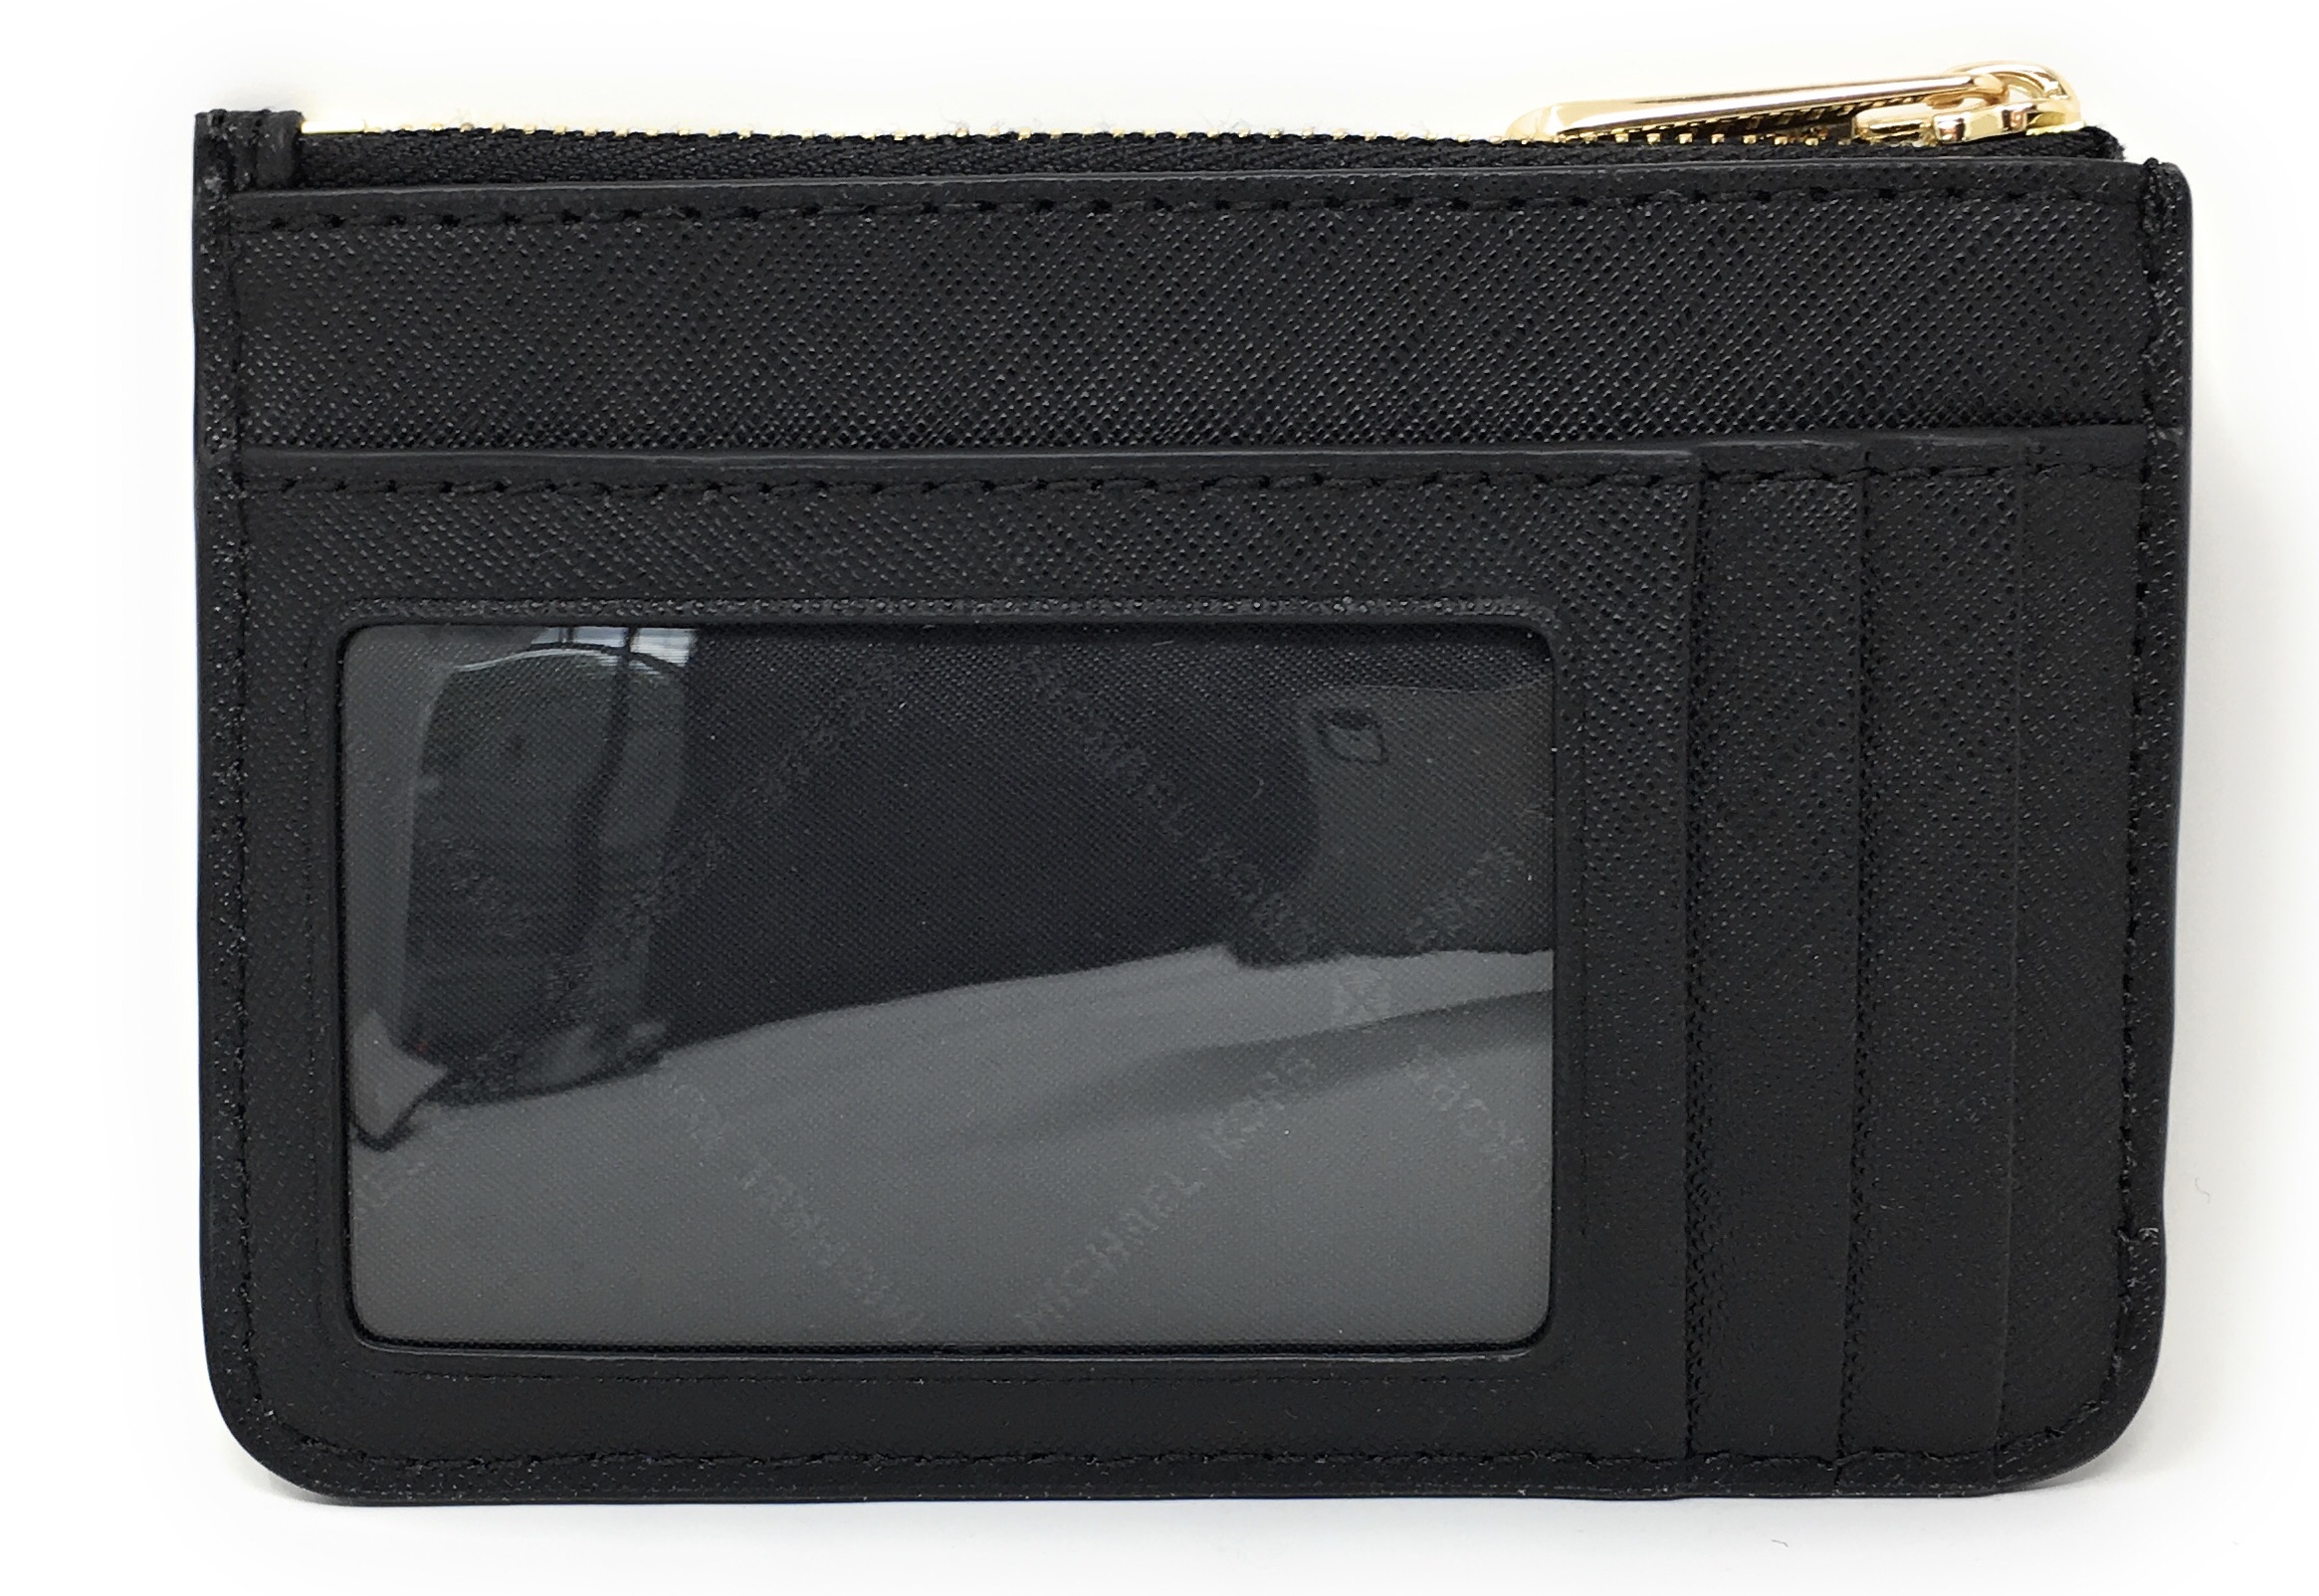 Michael Kors Jet Set Travel Small Top Zip Leather Coin Pouch / Wallet - Black - image 2 of 7